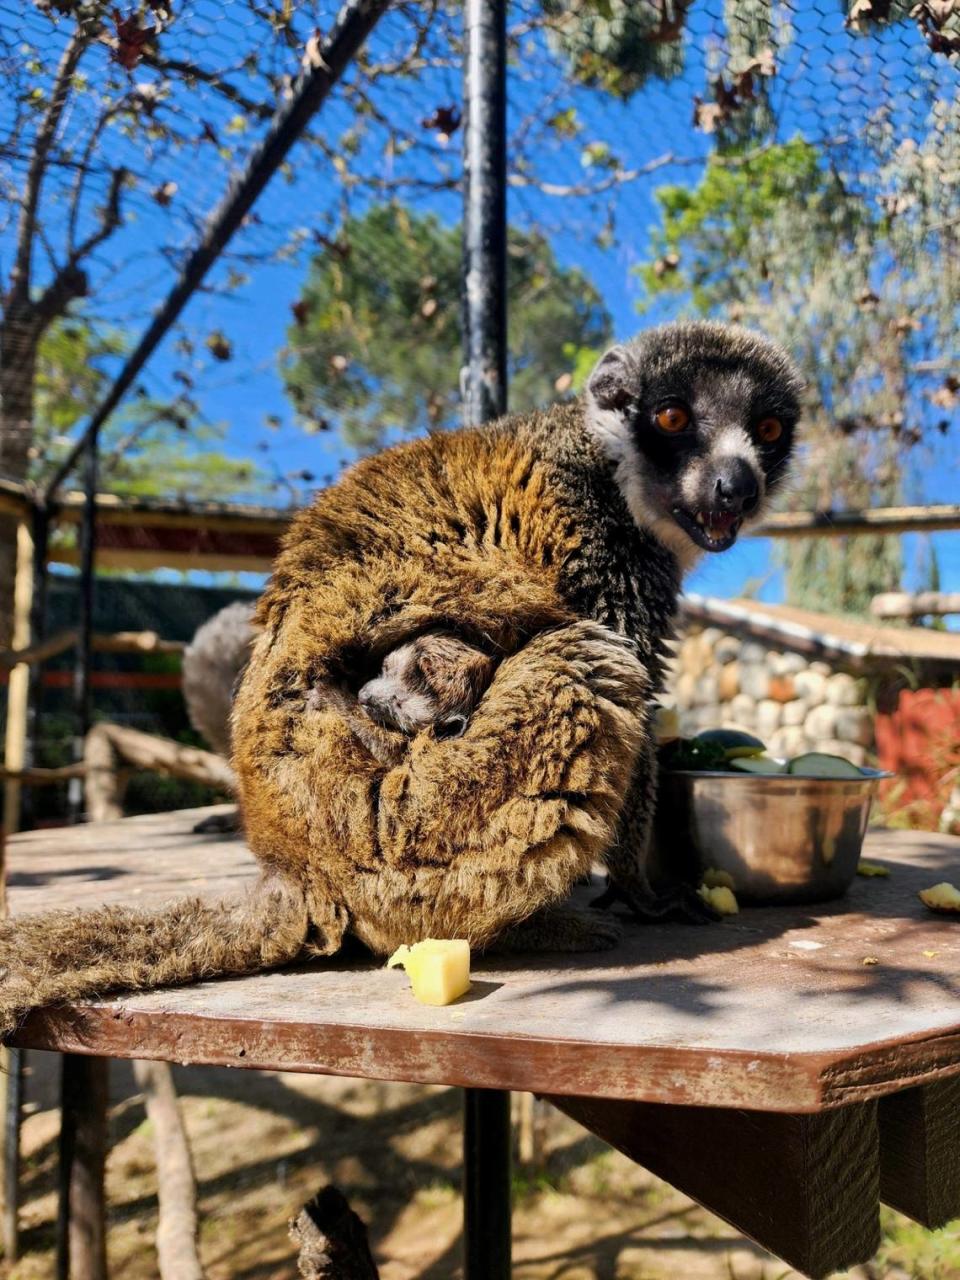 In early April 2024, a mongoose lemur was born at the Charles Paddock Zoo in Atascadero.  According to the International Union for Conservation of Nature Red List, mongoose lemurs are considered a 